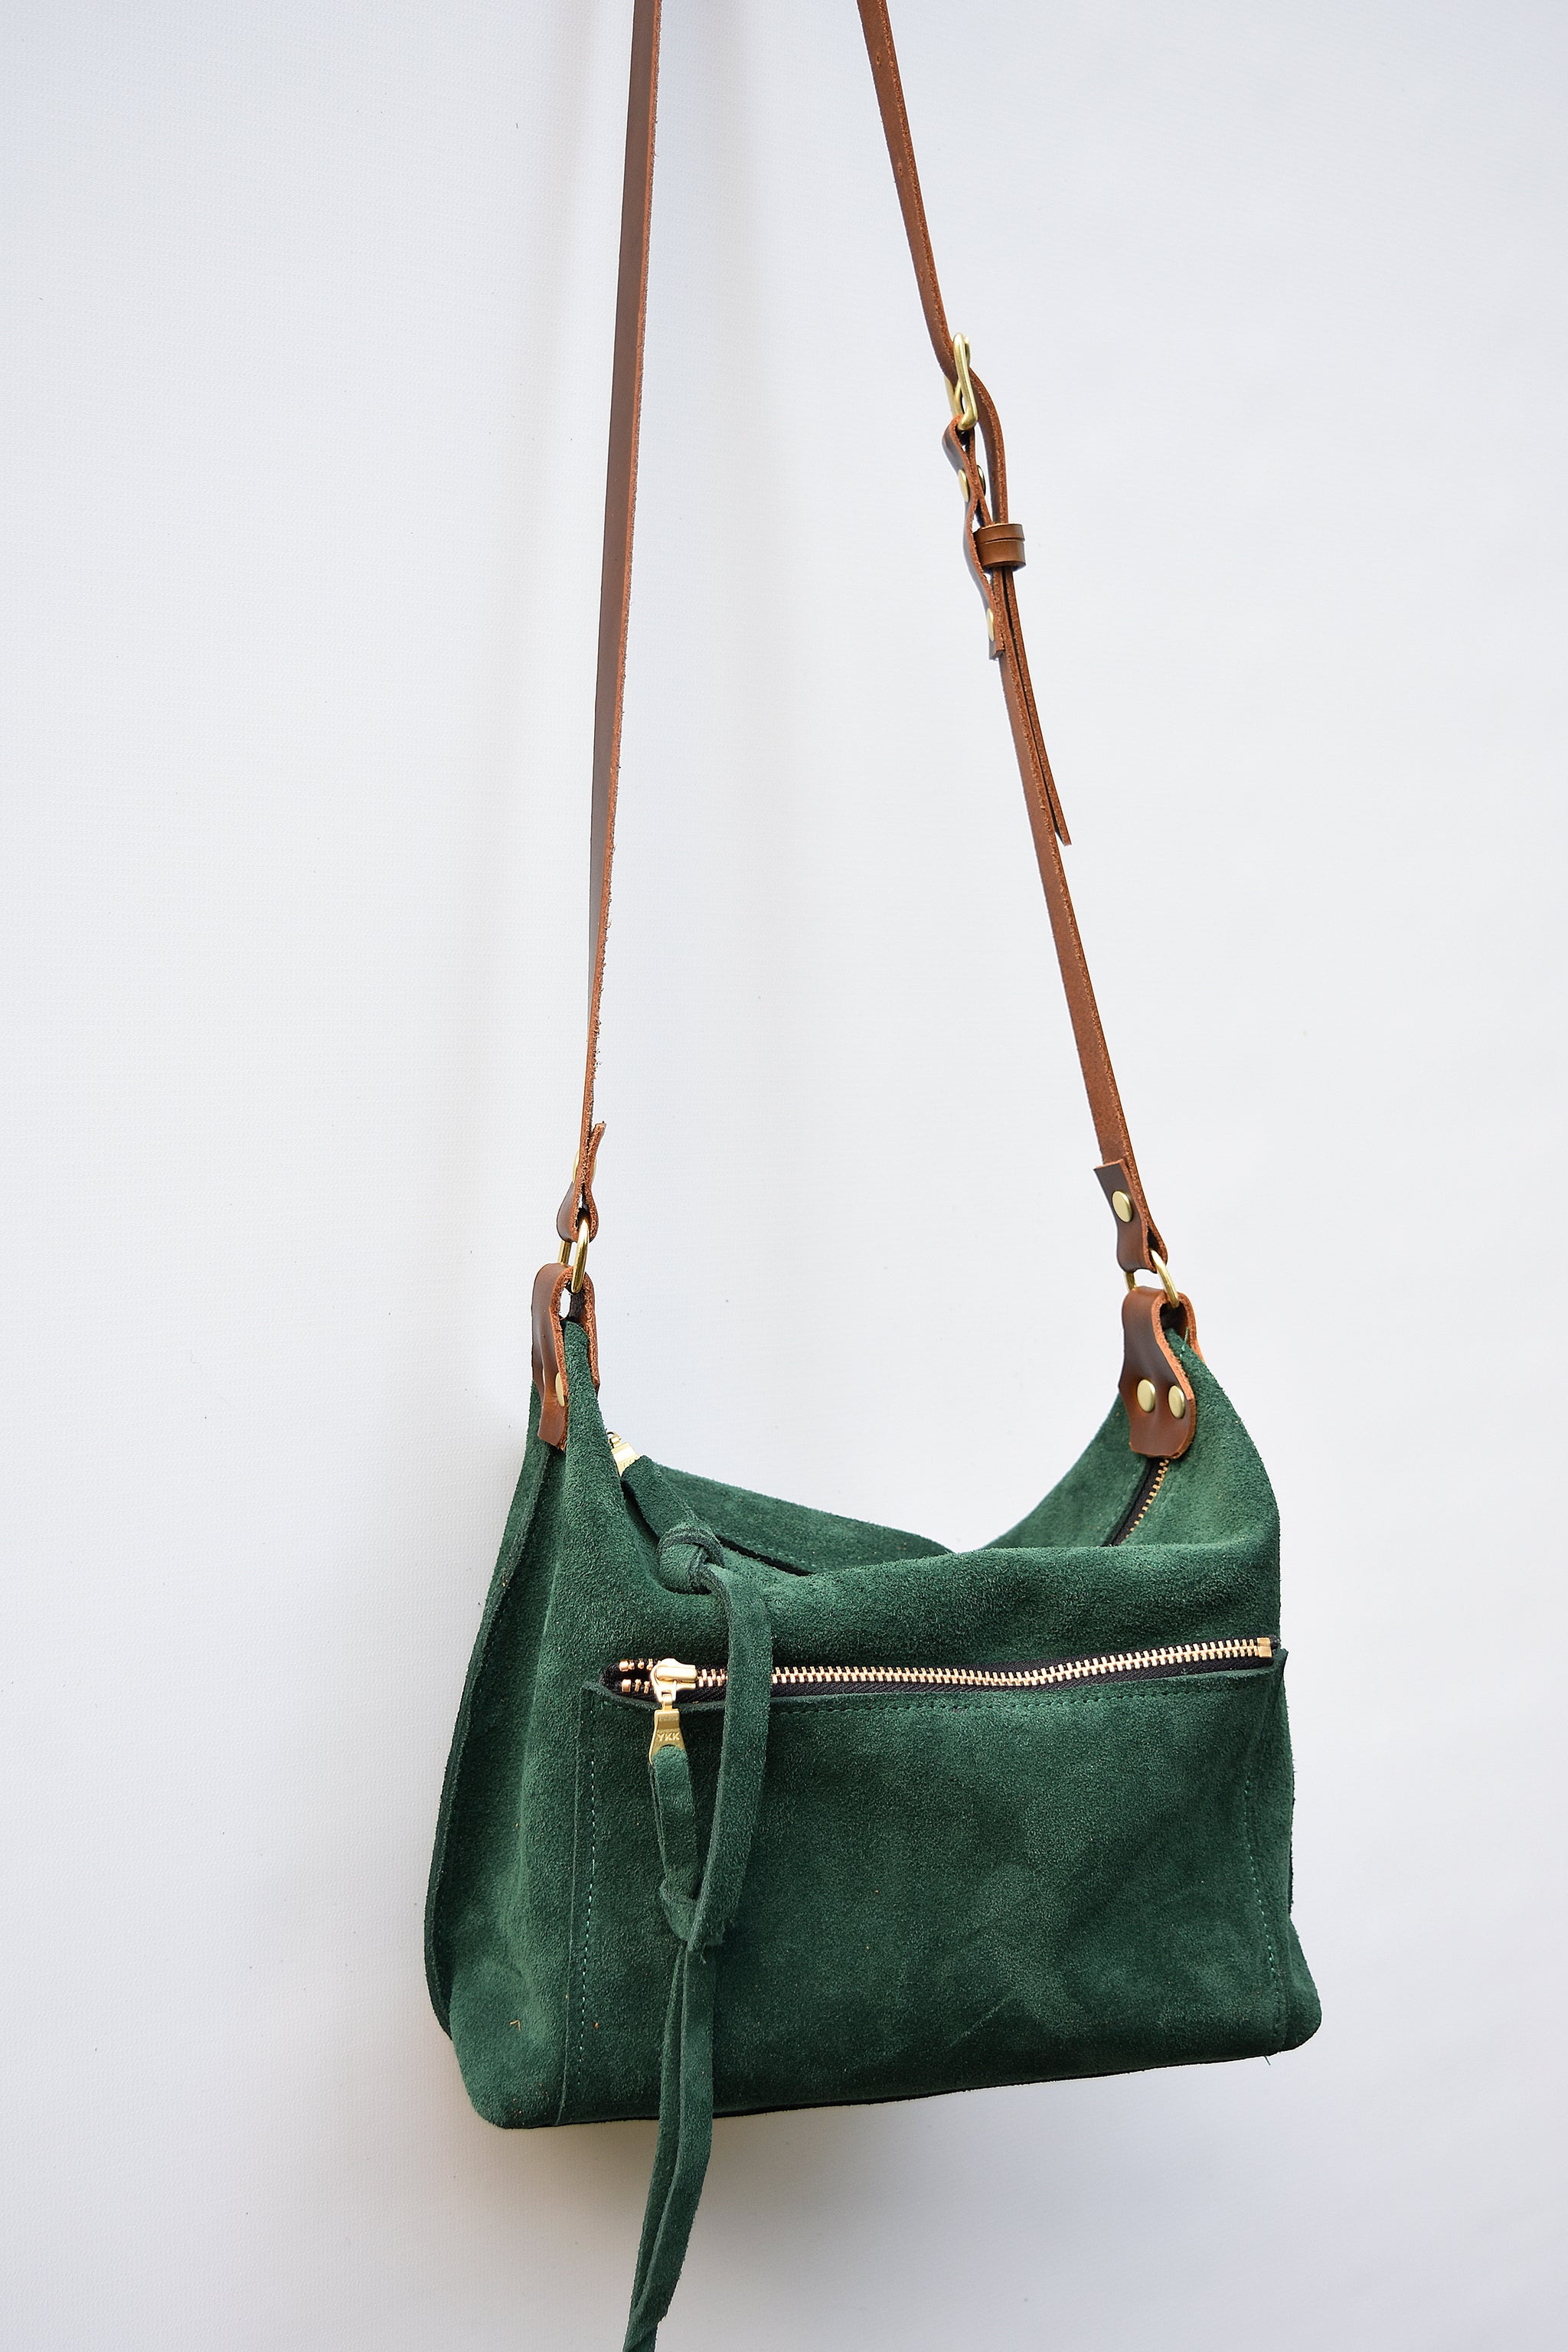 Buy Small Leather Bag in METALLIC GREEN .cross Body, Shoulder Bag or  Wristlet in GENUINE Leather. Green Leather Purse Adjustable Strap Online in  India - Etsy